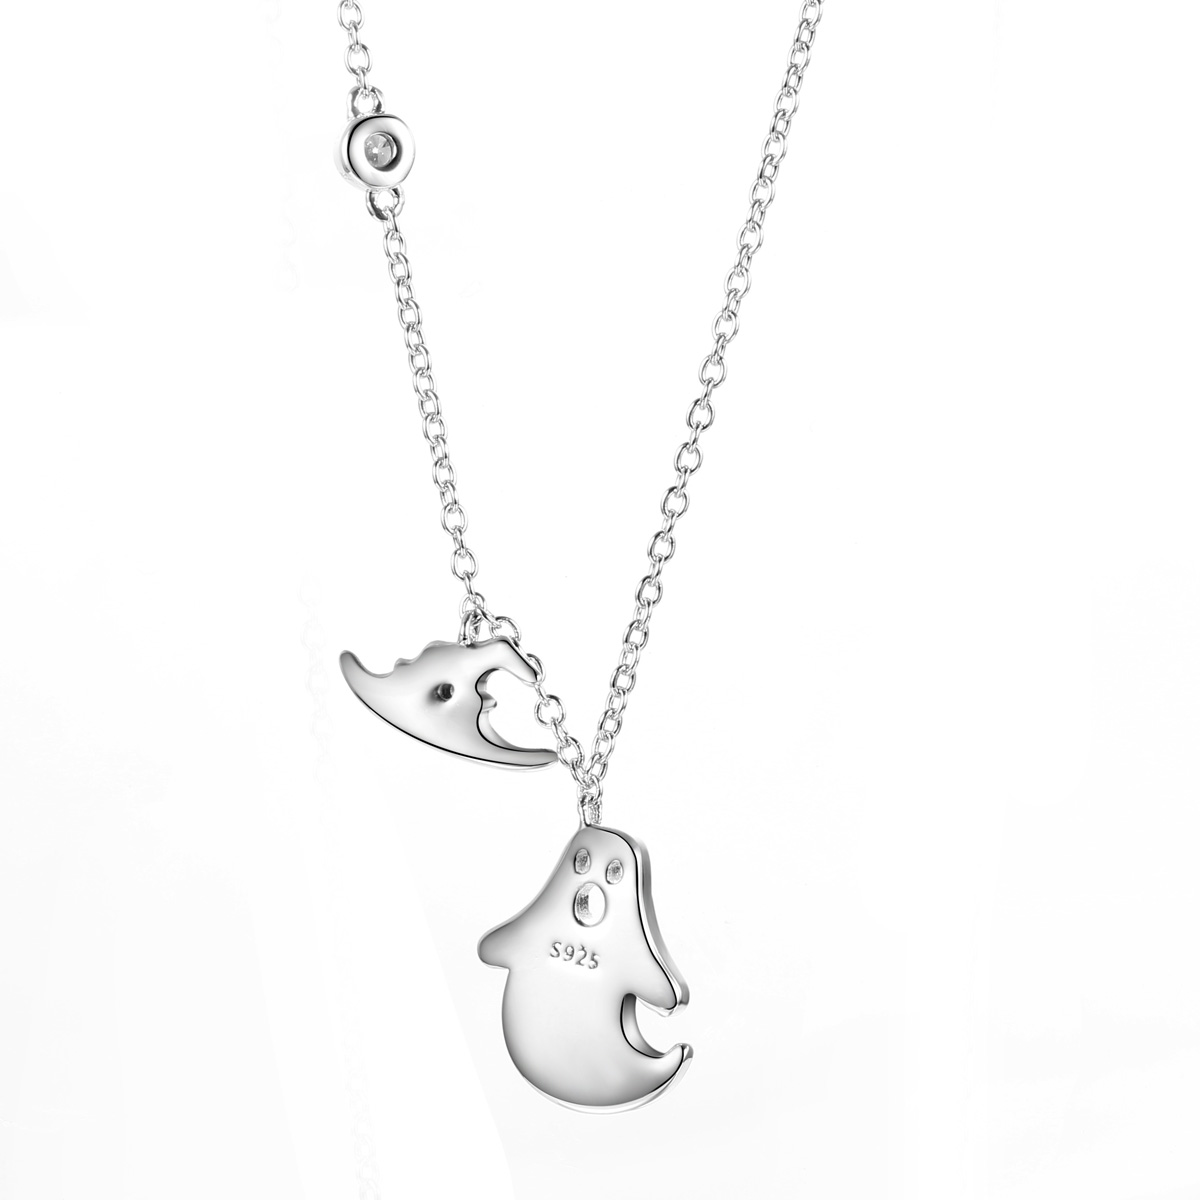 enchanter ghost necklace